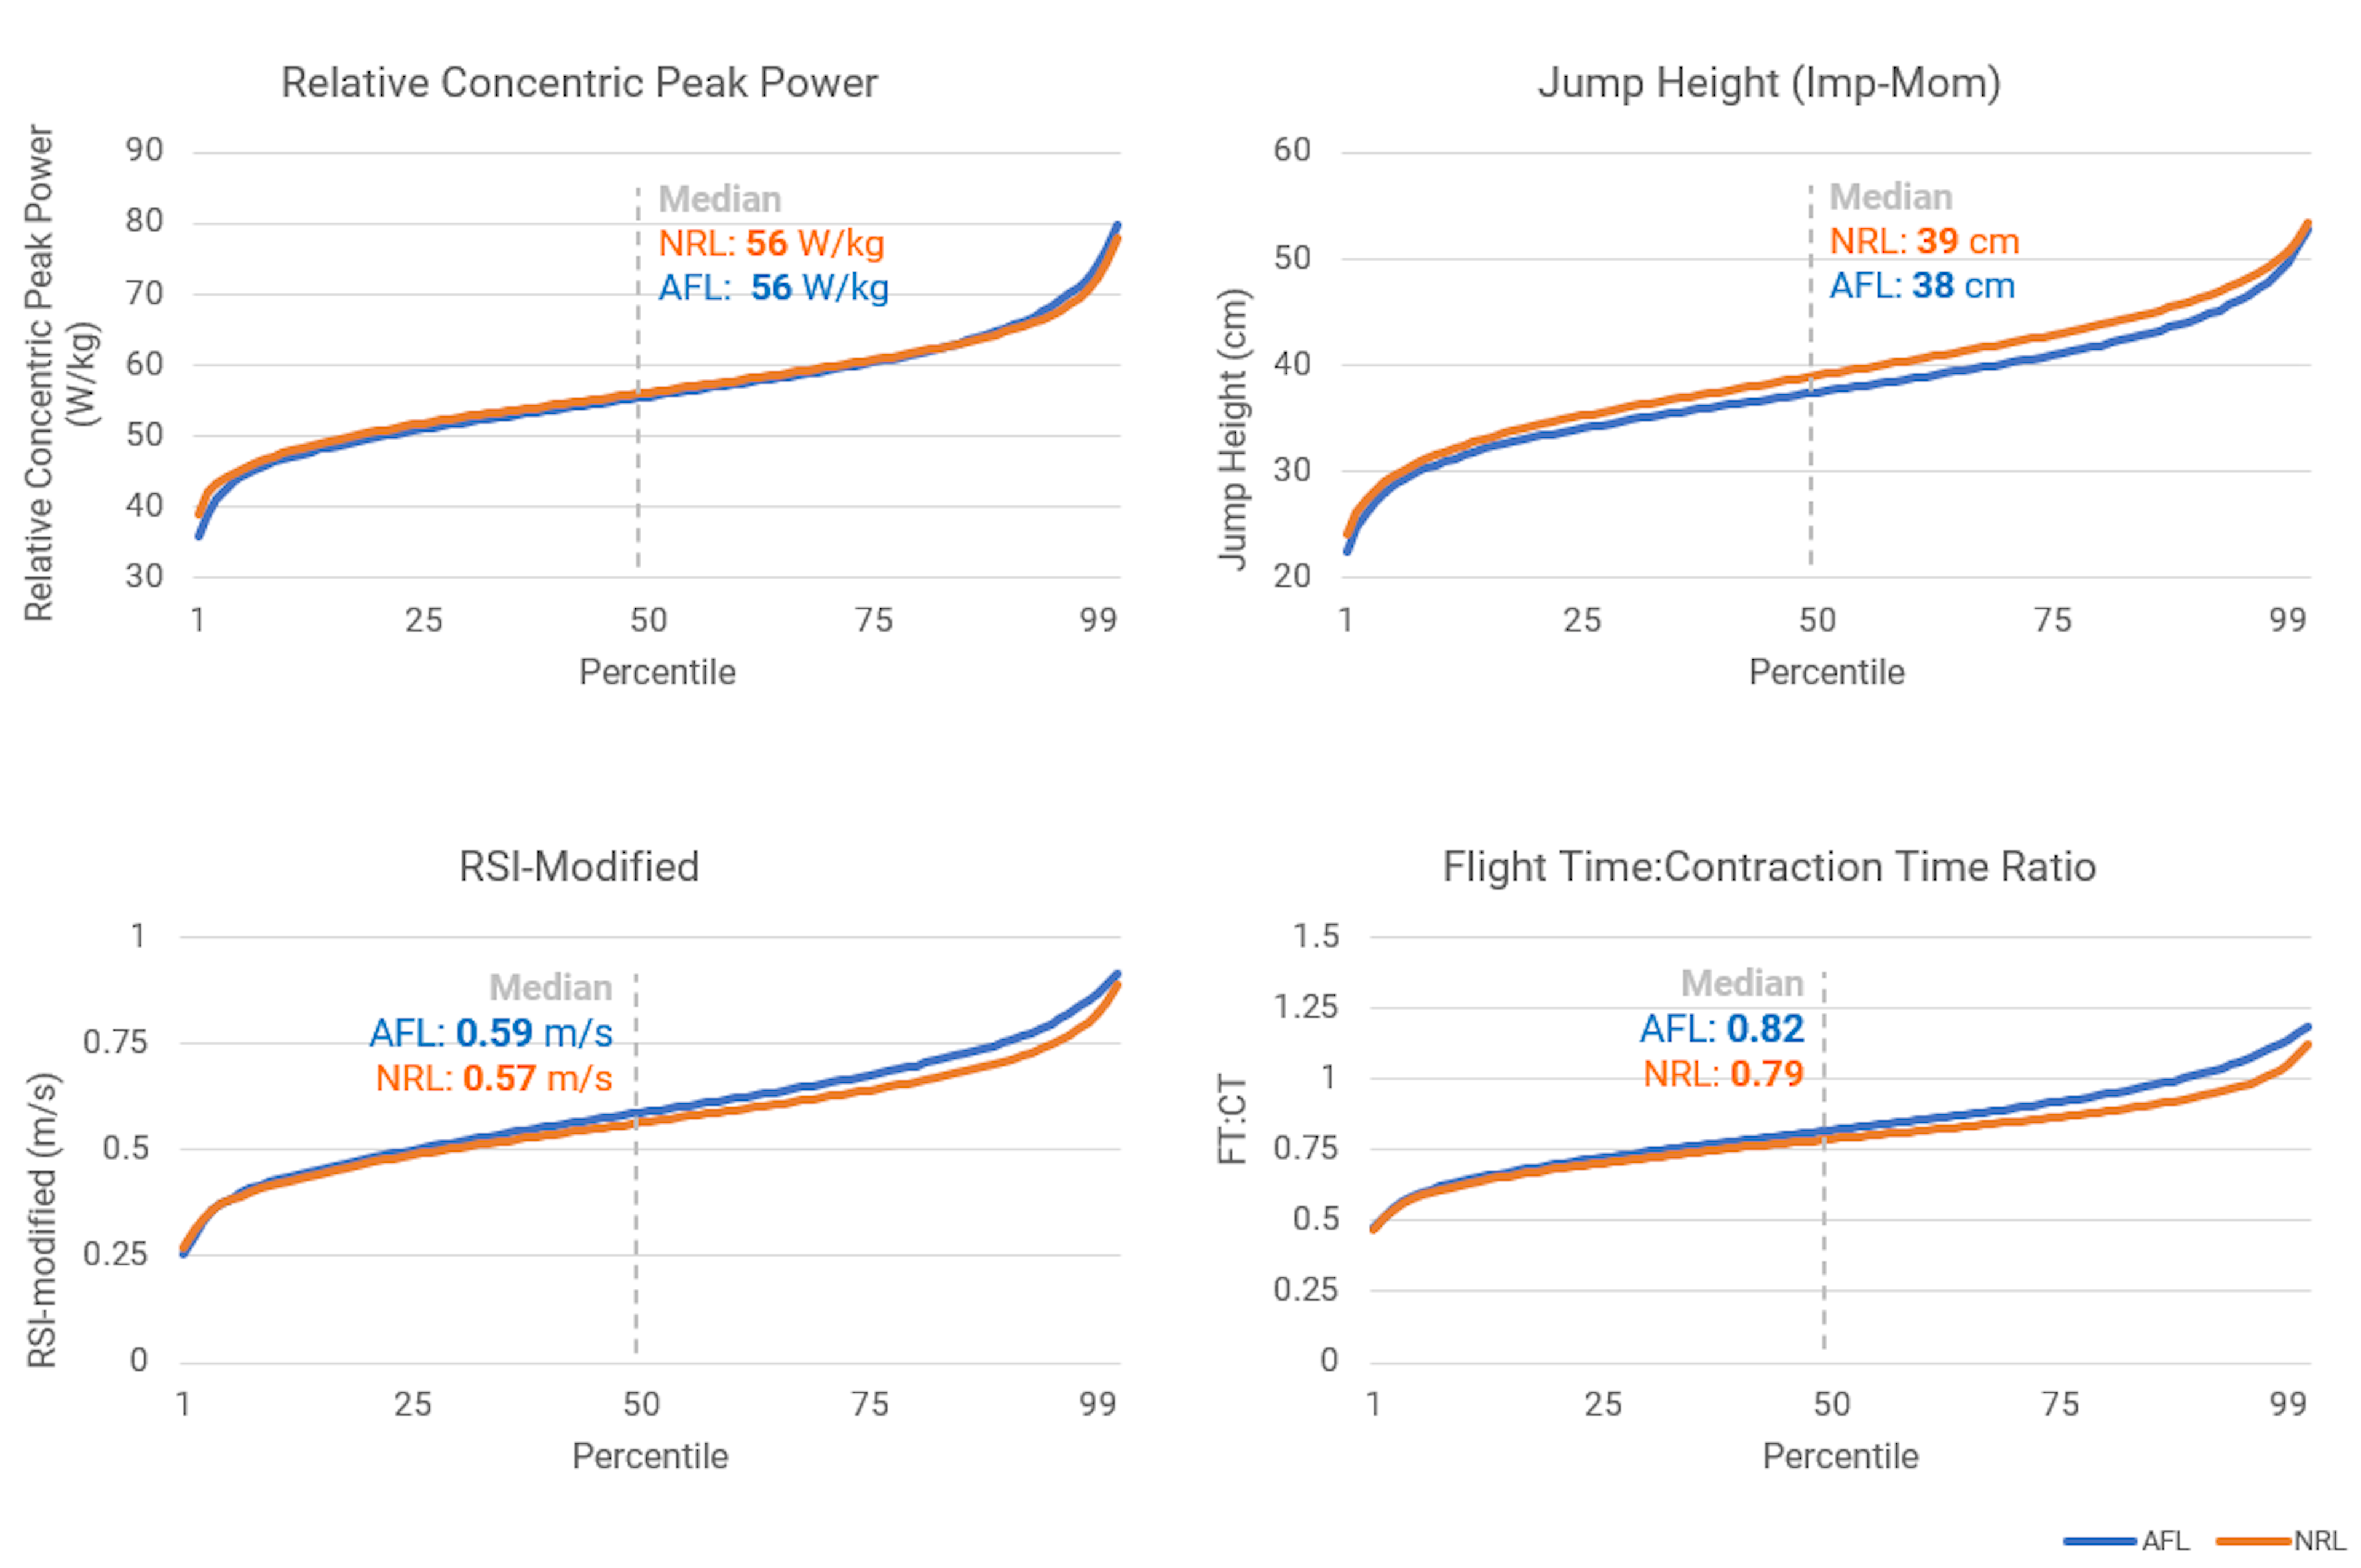 Figure 2. Normative data across four key metrics; relative concentric peak power, jump height, RSI-modified, and flight time:contraction time ratio, across both the AFL and the NRL competitions.